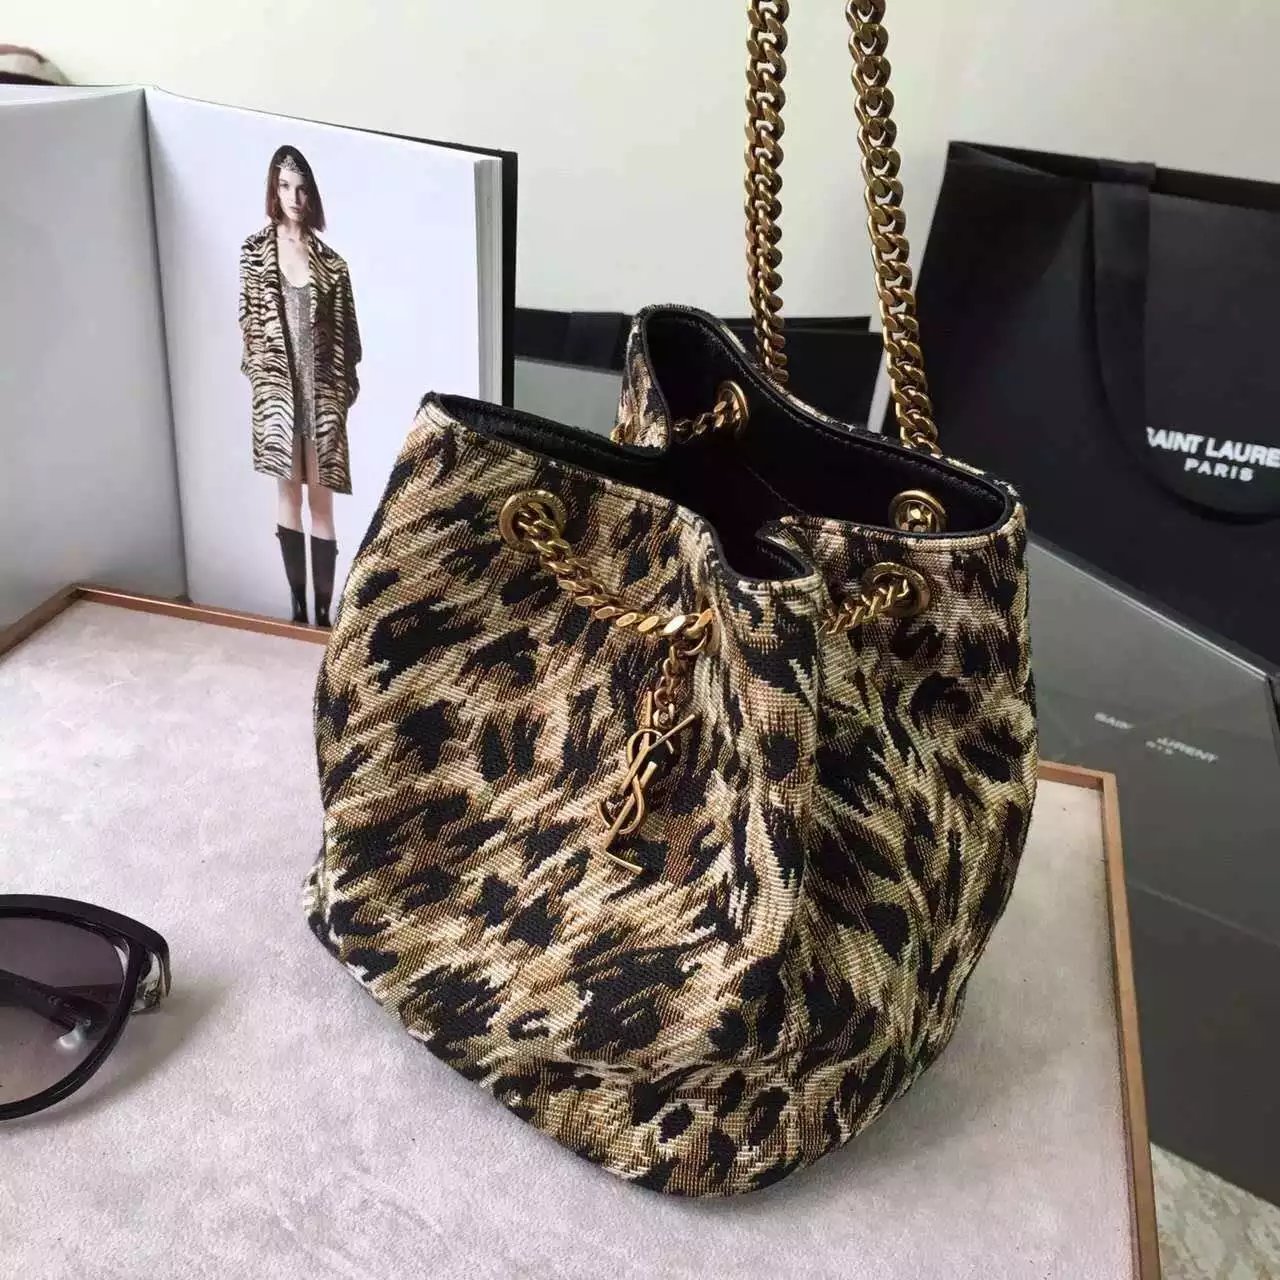 Limited Edition!2016 New Saint Laurent Bag Cheap Sale-Saint Laurent Classic Baby Emmanuelle Chain Bucket Bag in Natural and Black Leopard Woven Polyester and Cotton - Click Image to Close